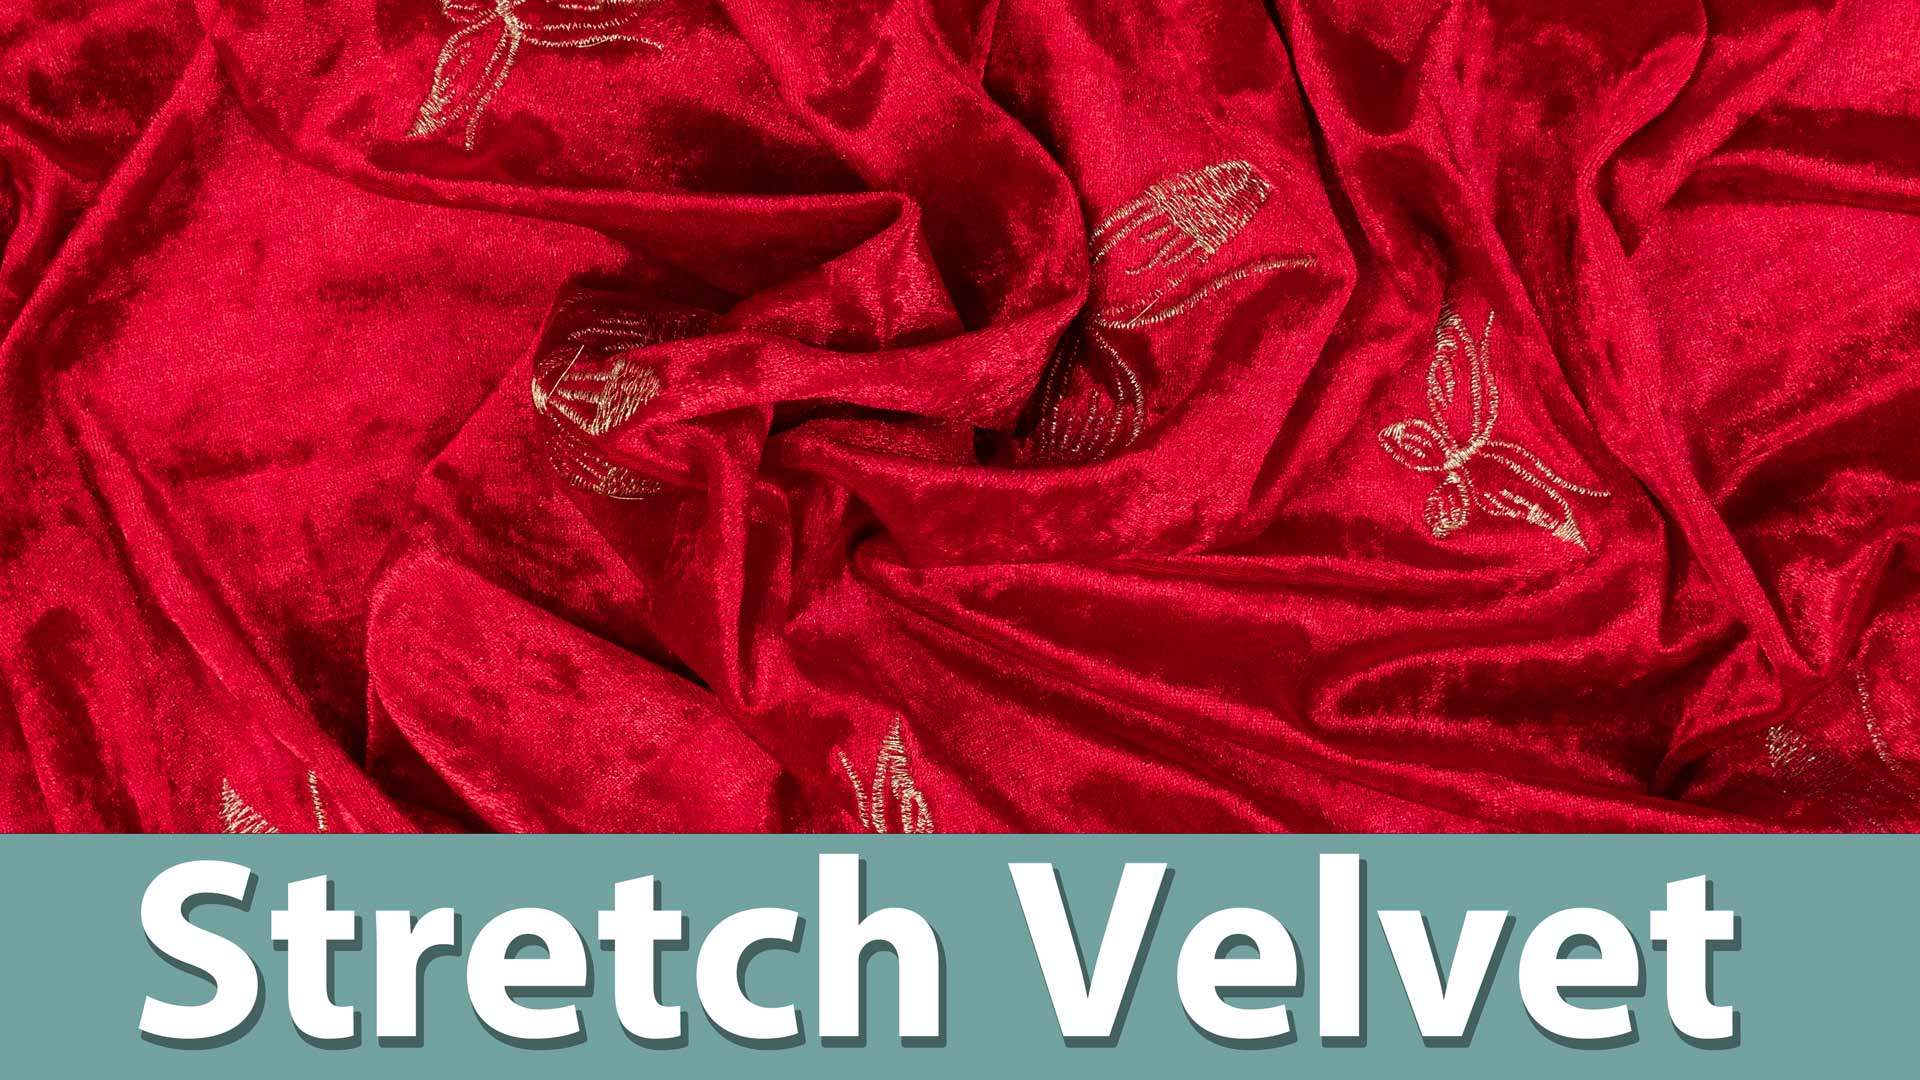 Sewing with Stretch Velvet - Professor Pincushion